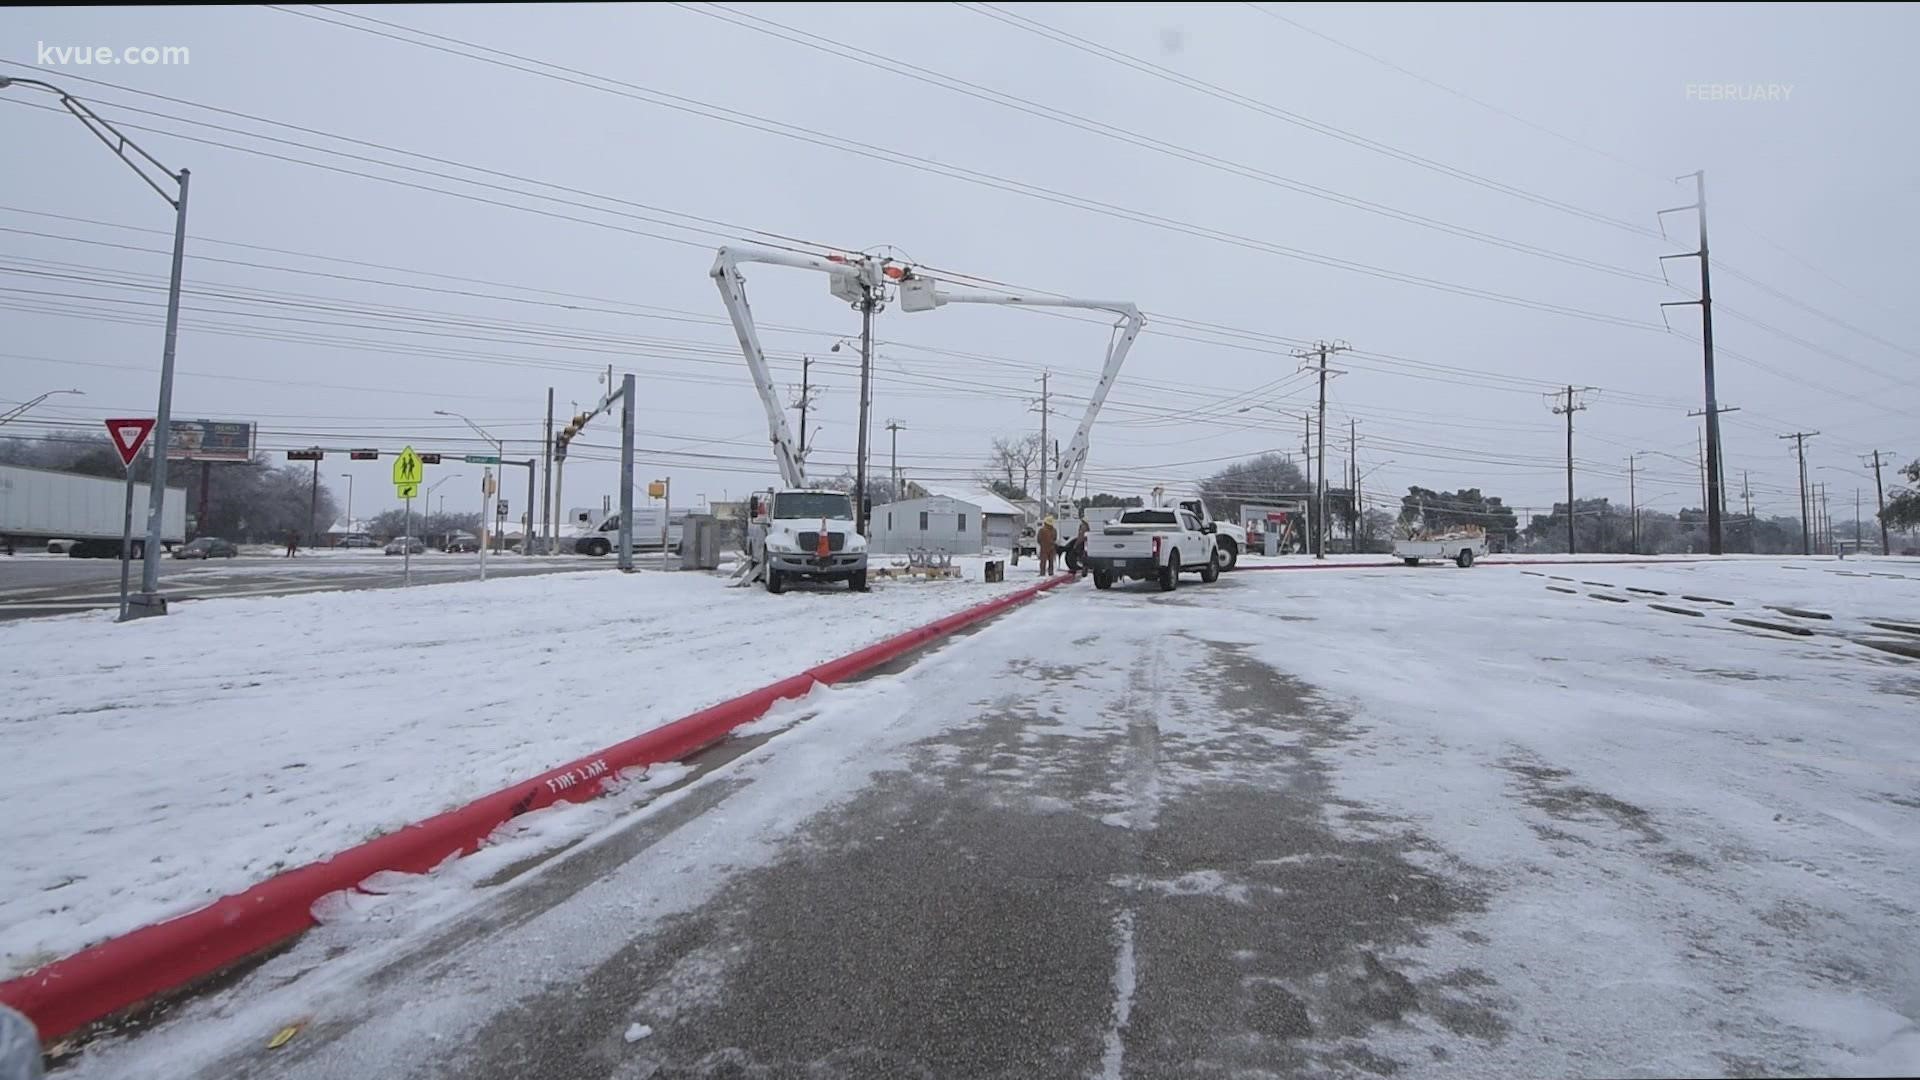 More than 300 units making up 85% of the power lost during February's winter storm have now been inspected.